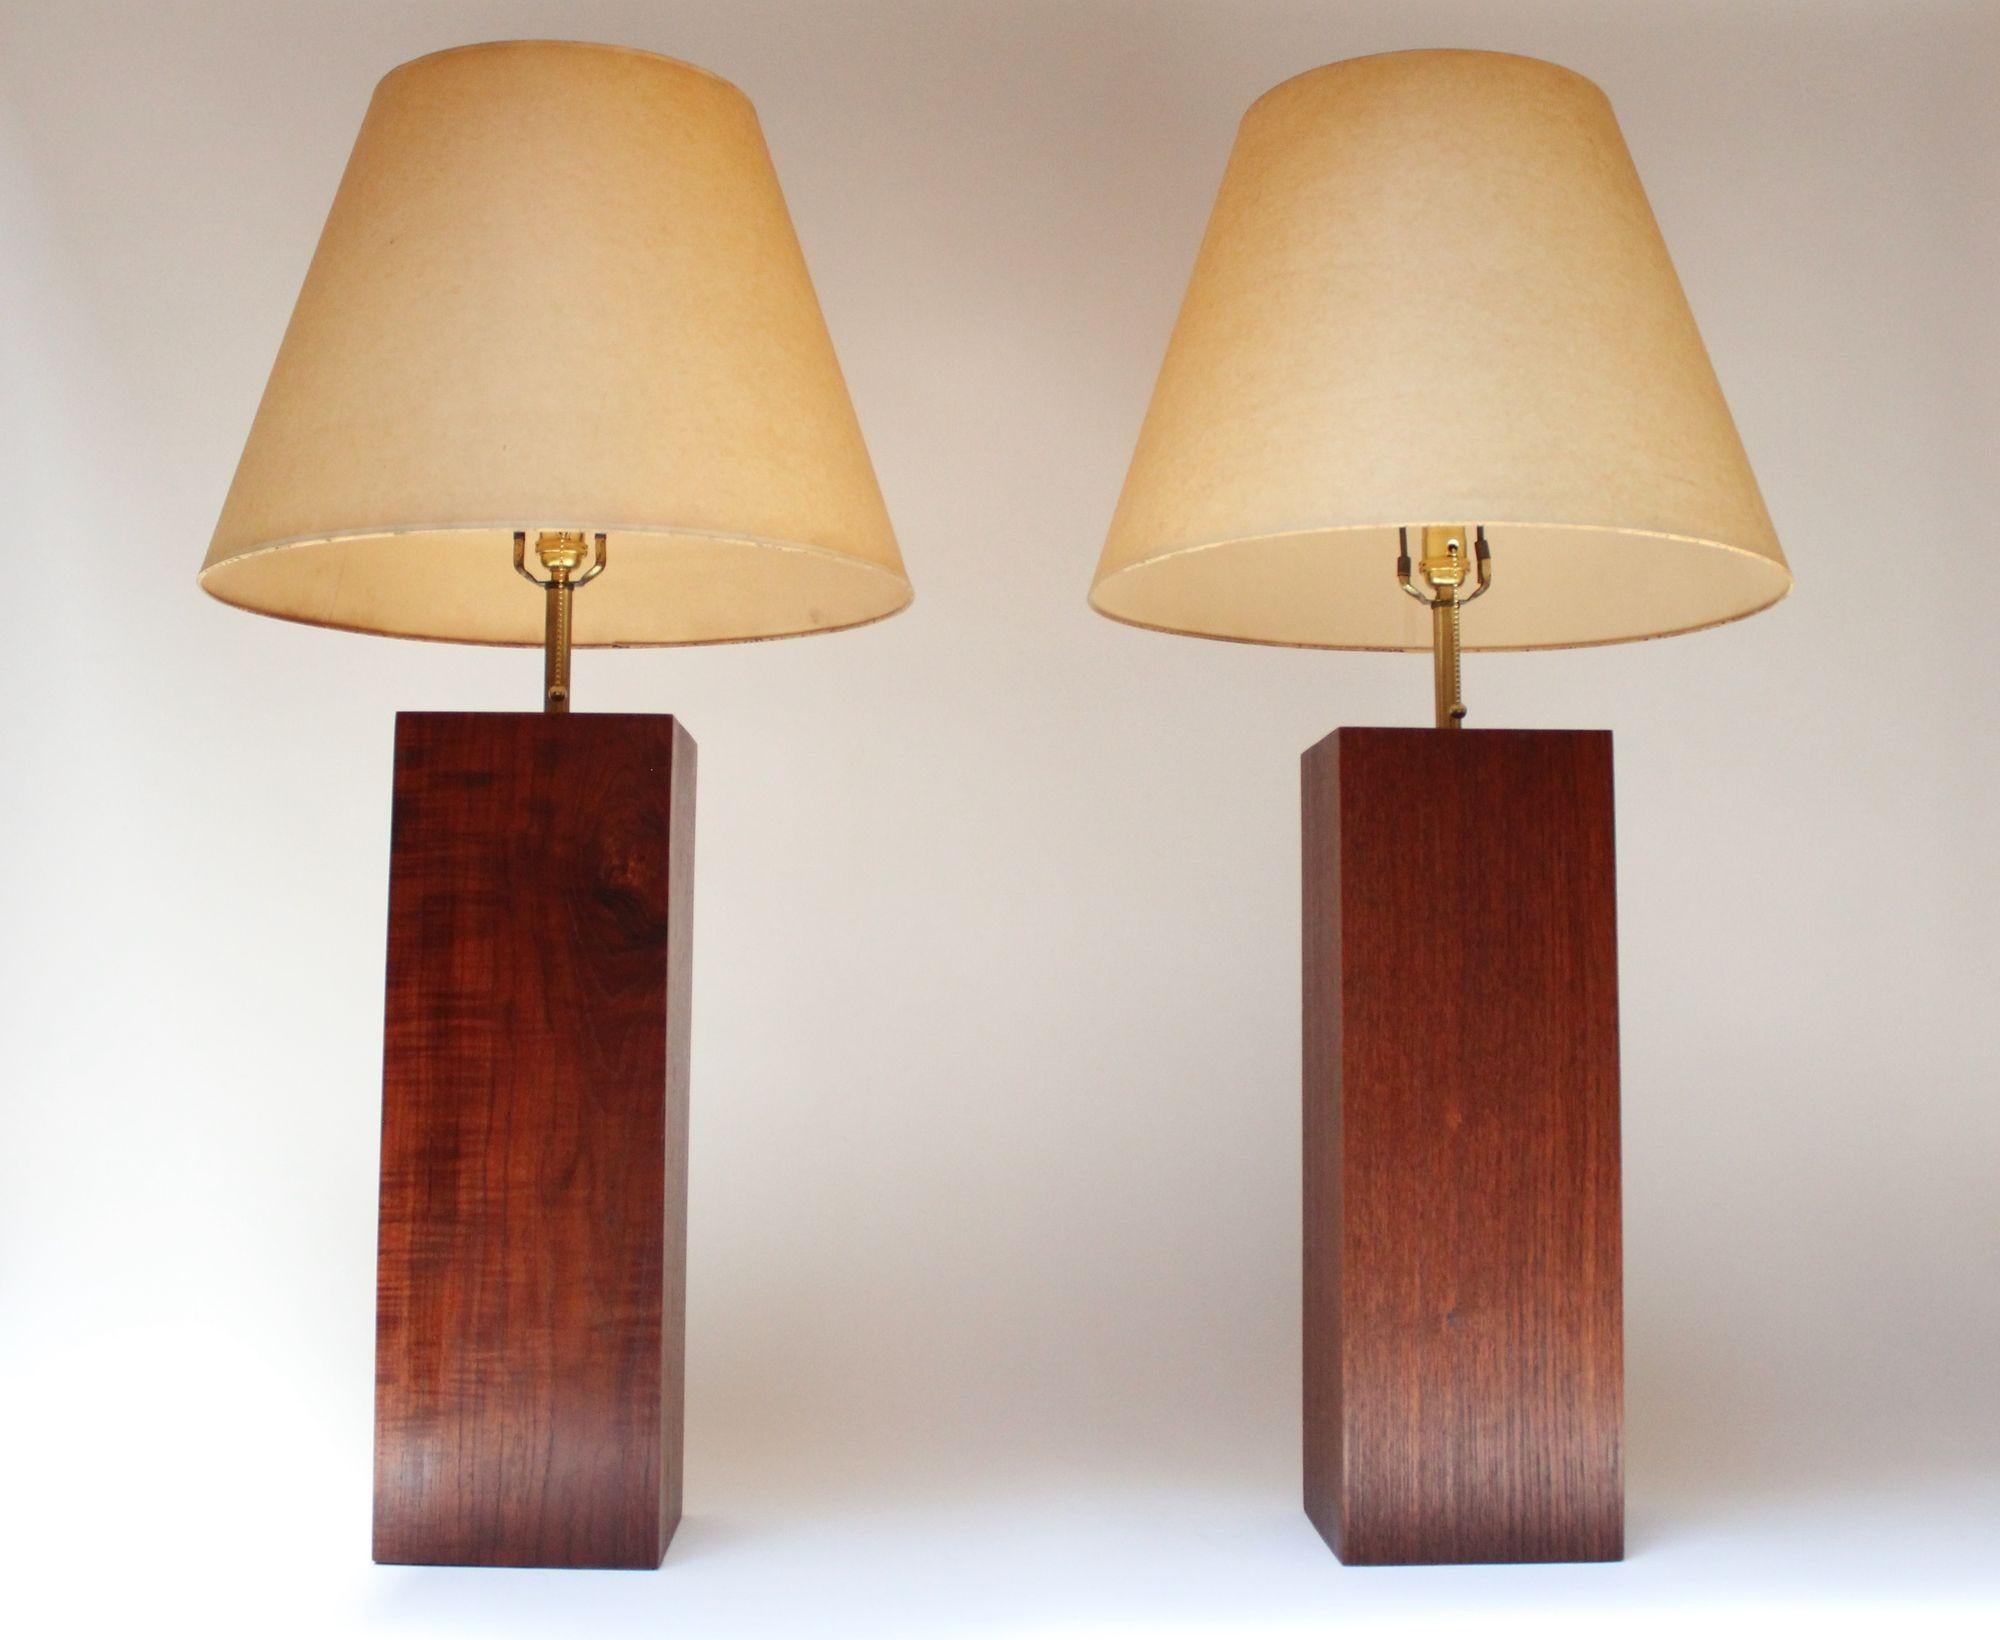 Handsome pair of vintage column/block-form table lamps in walnut with brass stems (ca. 1960s, USA). Organic form with clean lines and exquisite wood grain. (Shades are for demonstration purposes only and are not included.)
Large in scale measuring